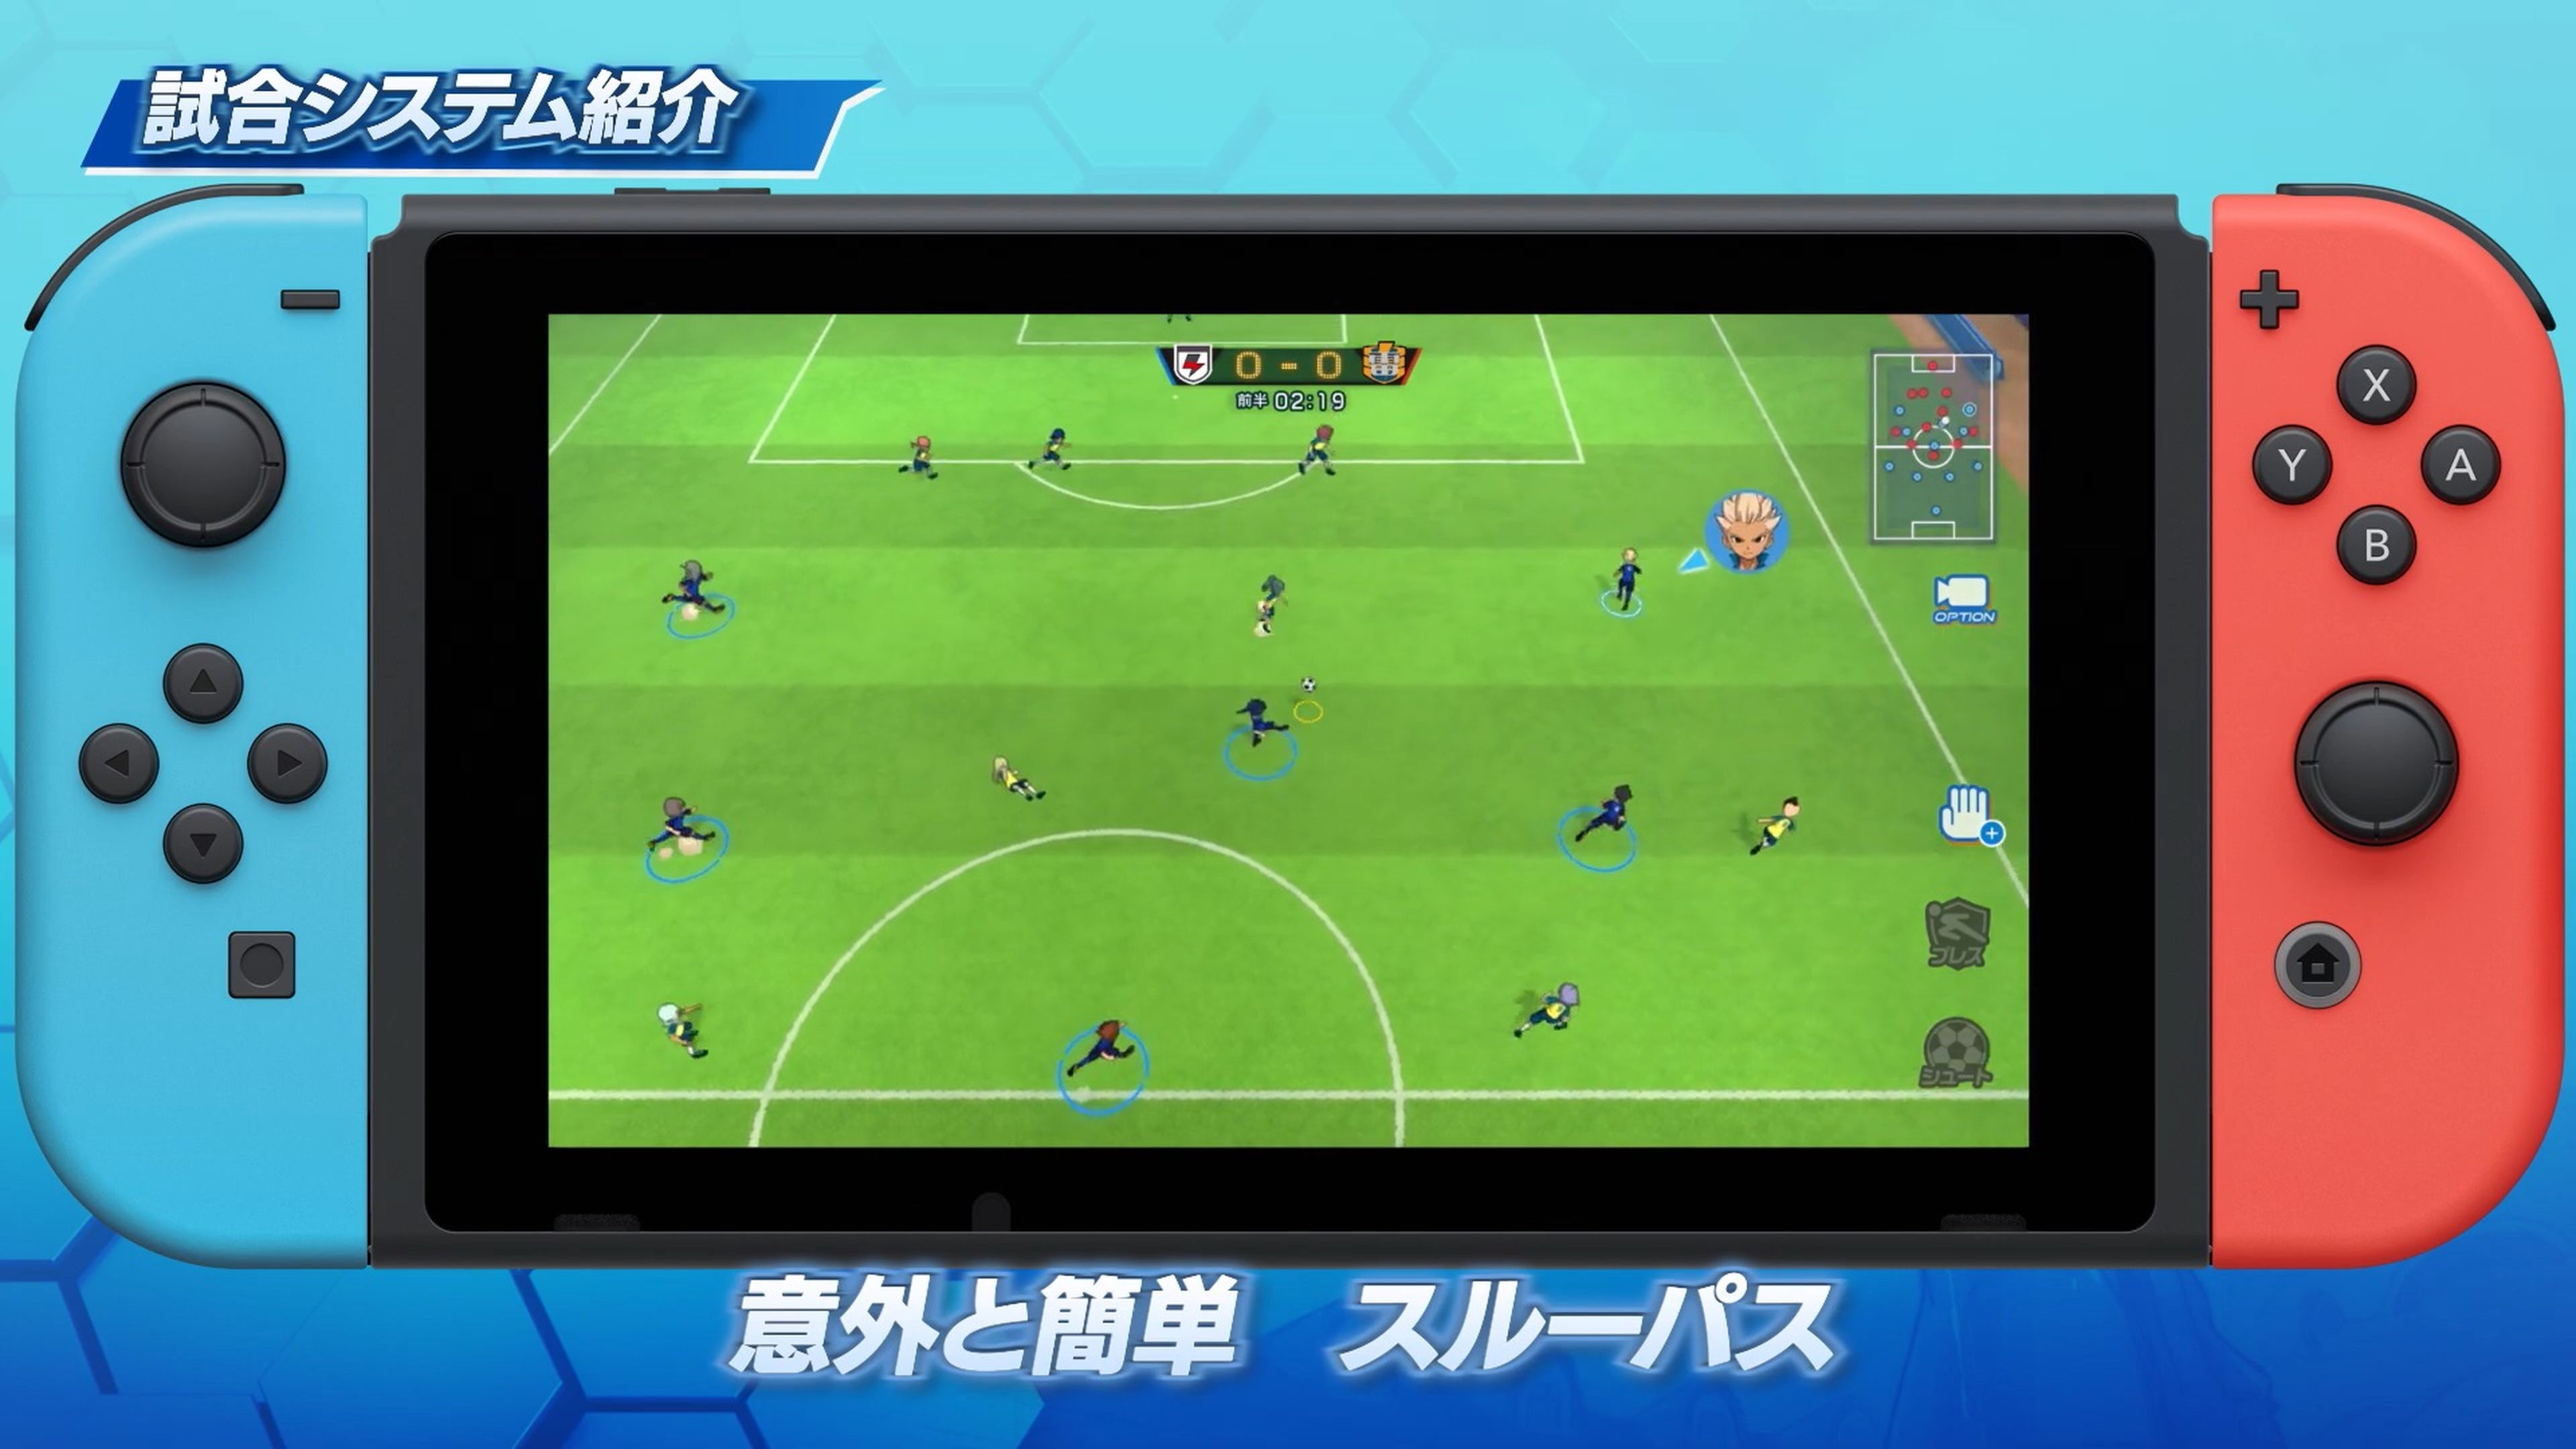 Inazuma Eleven Victory Road of Heroes